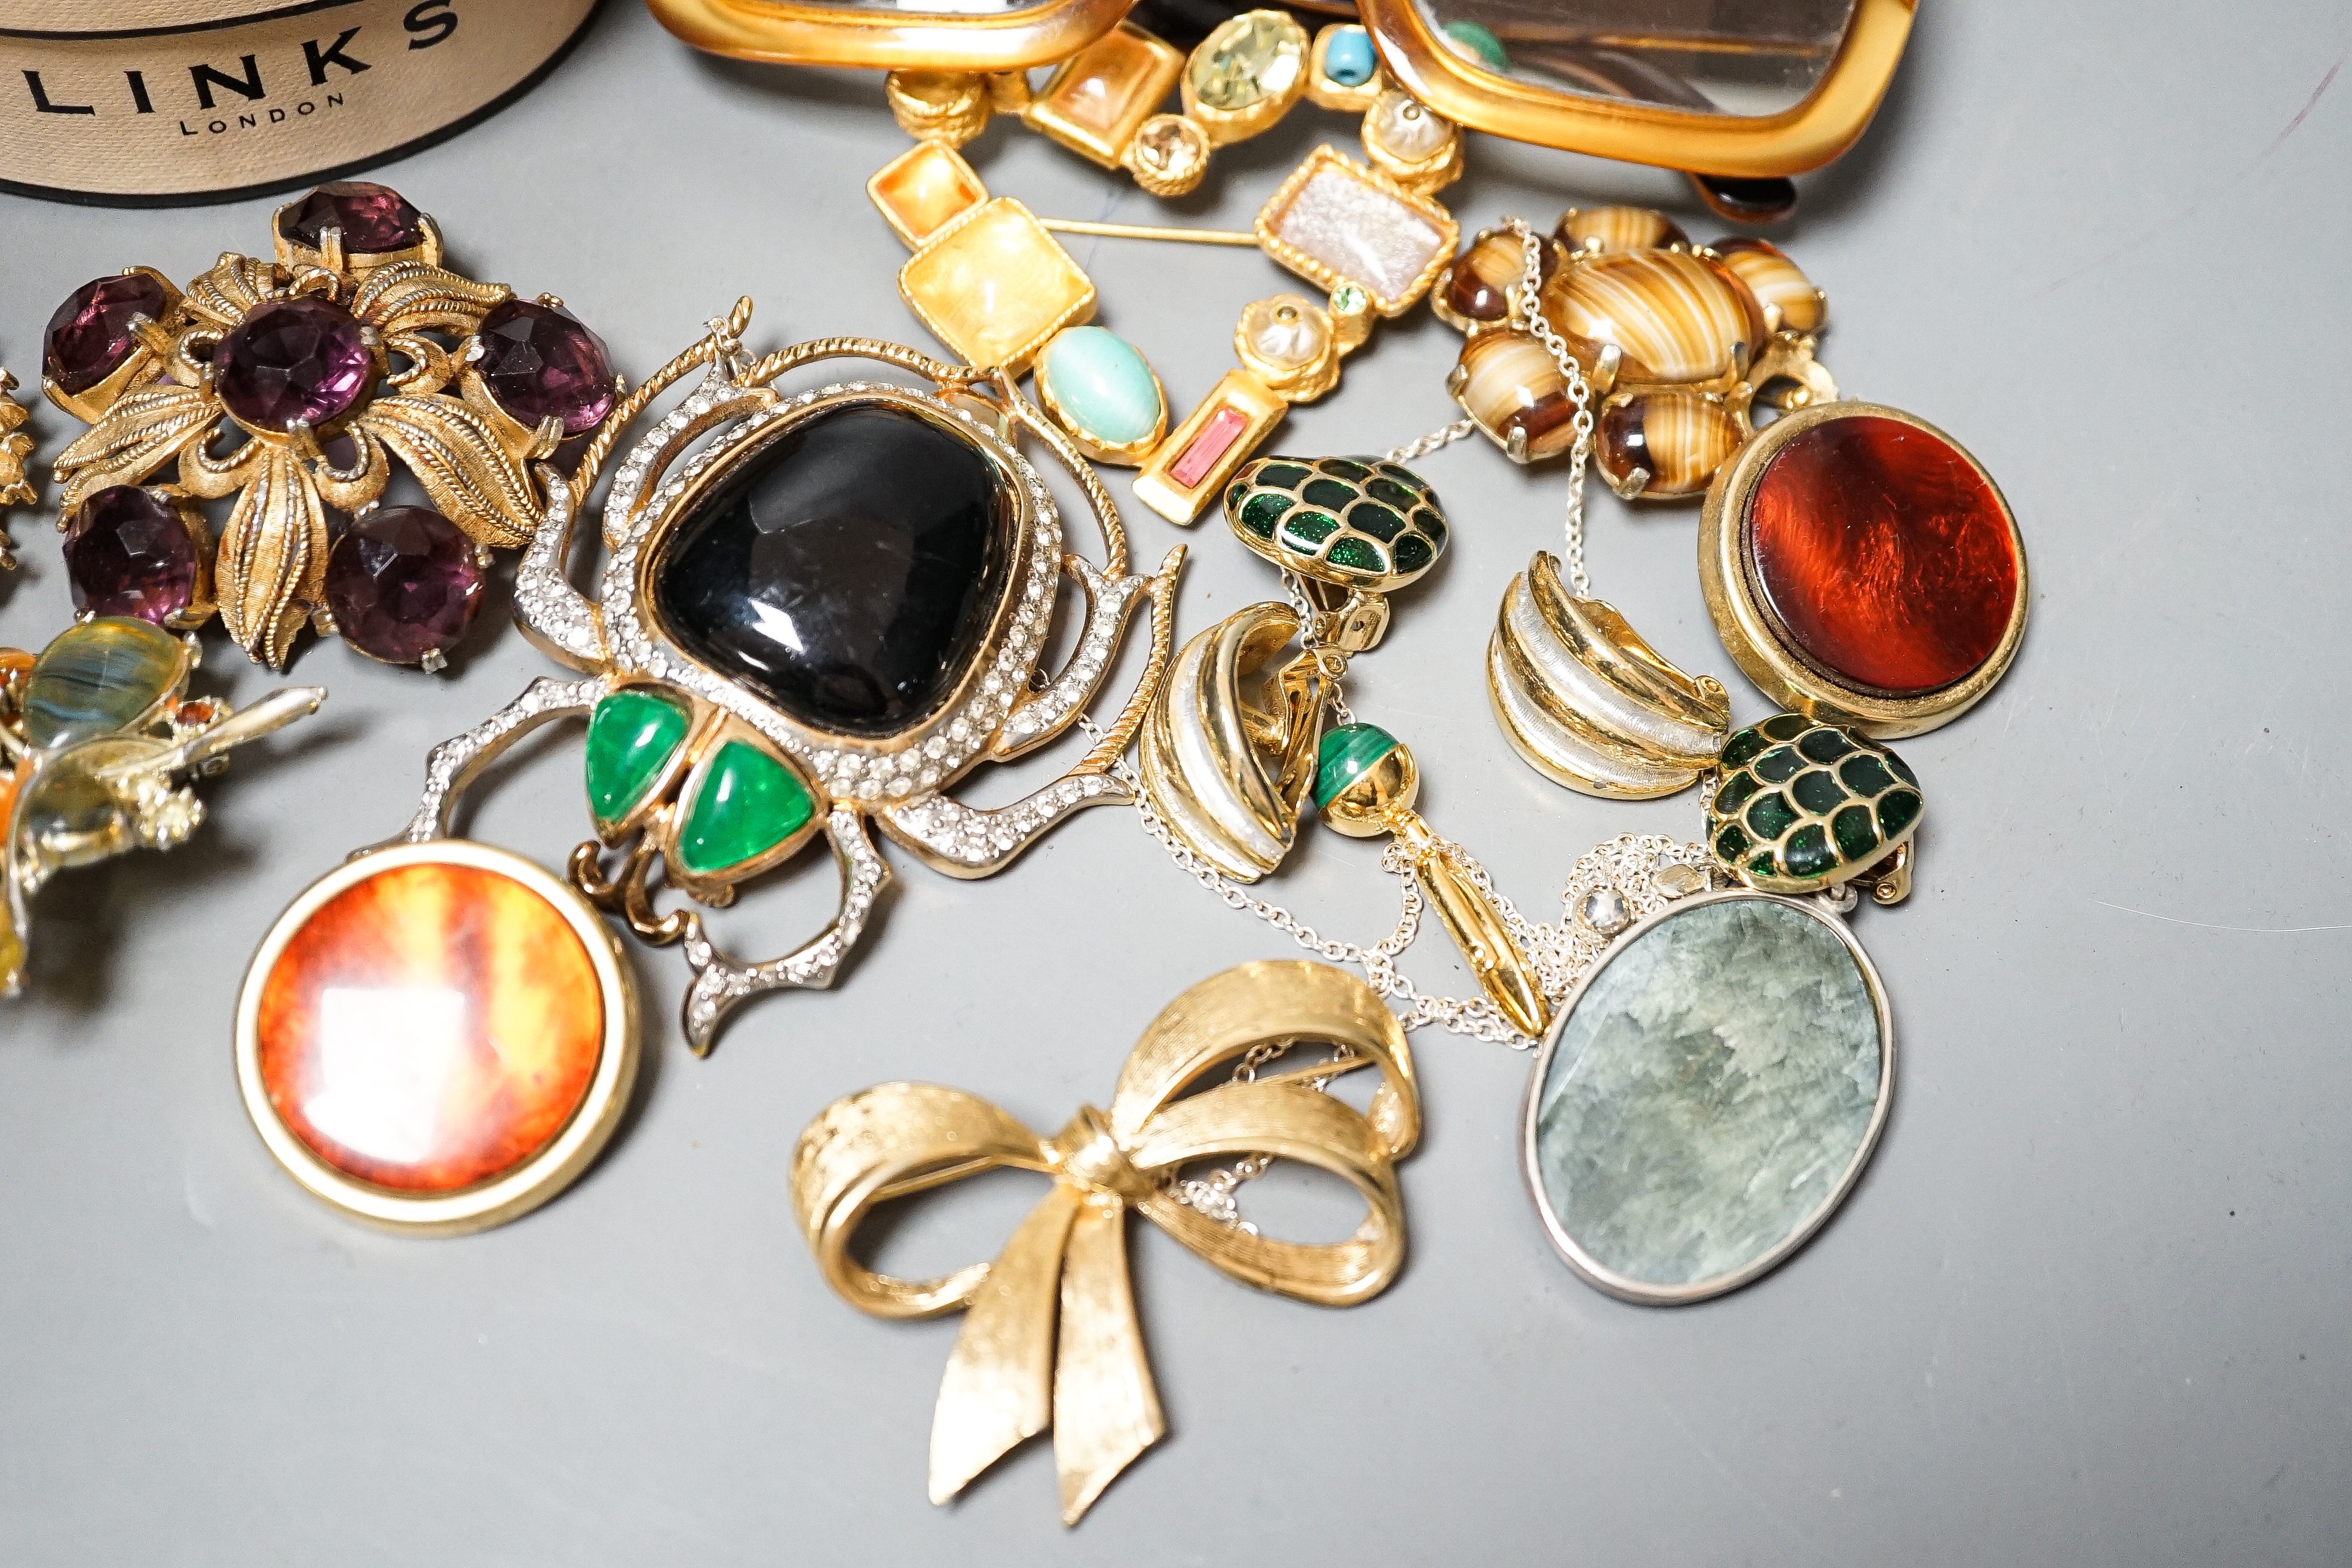 A mixed lot of costume jewellery including Christian Lacroix, scarab brooch stamped Valentino, Dior glasses etc.